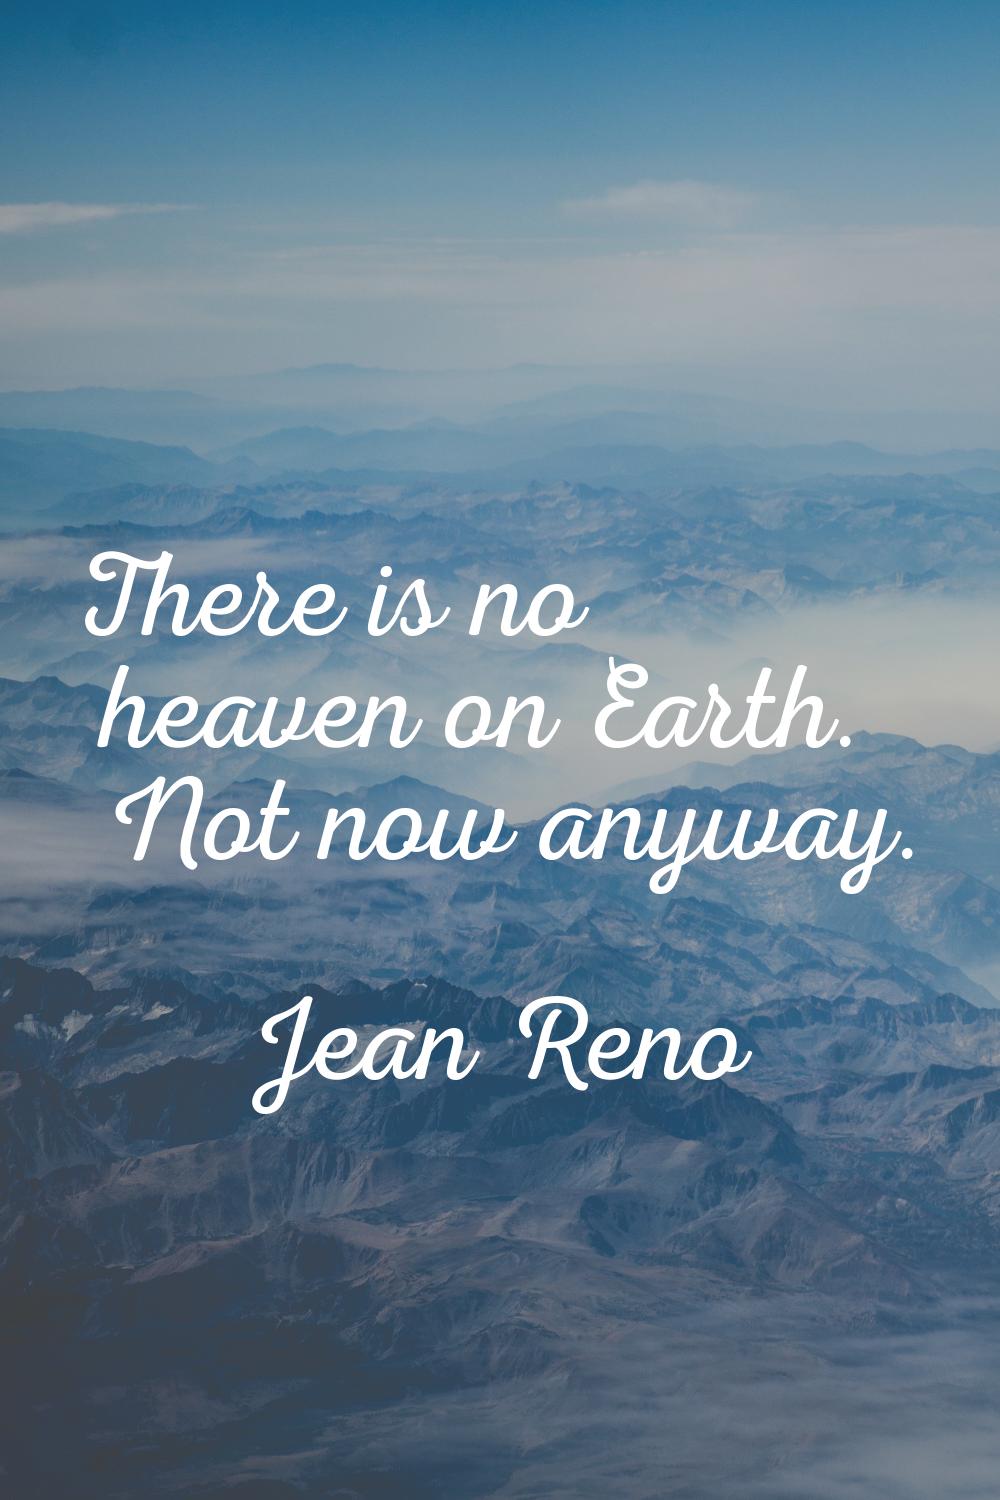 There is no heaven on Earth. Not now anyway.